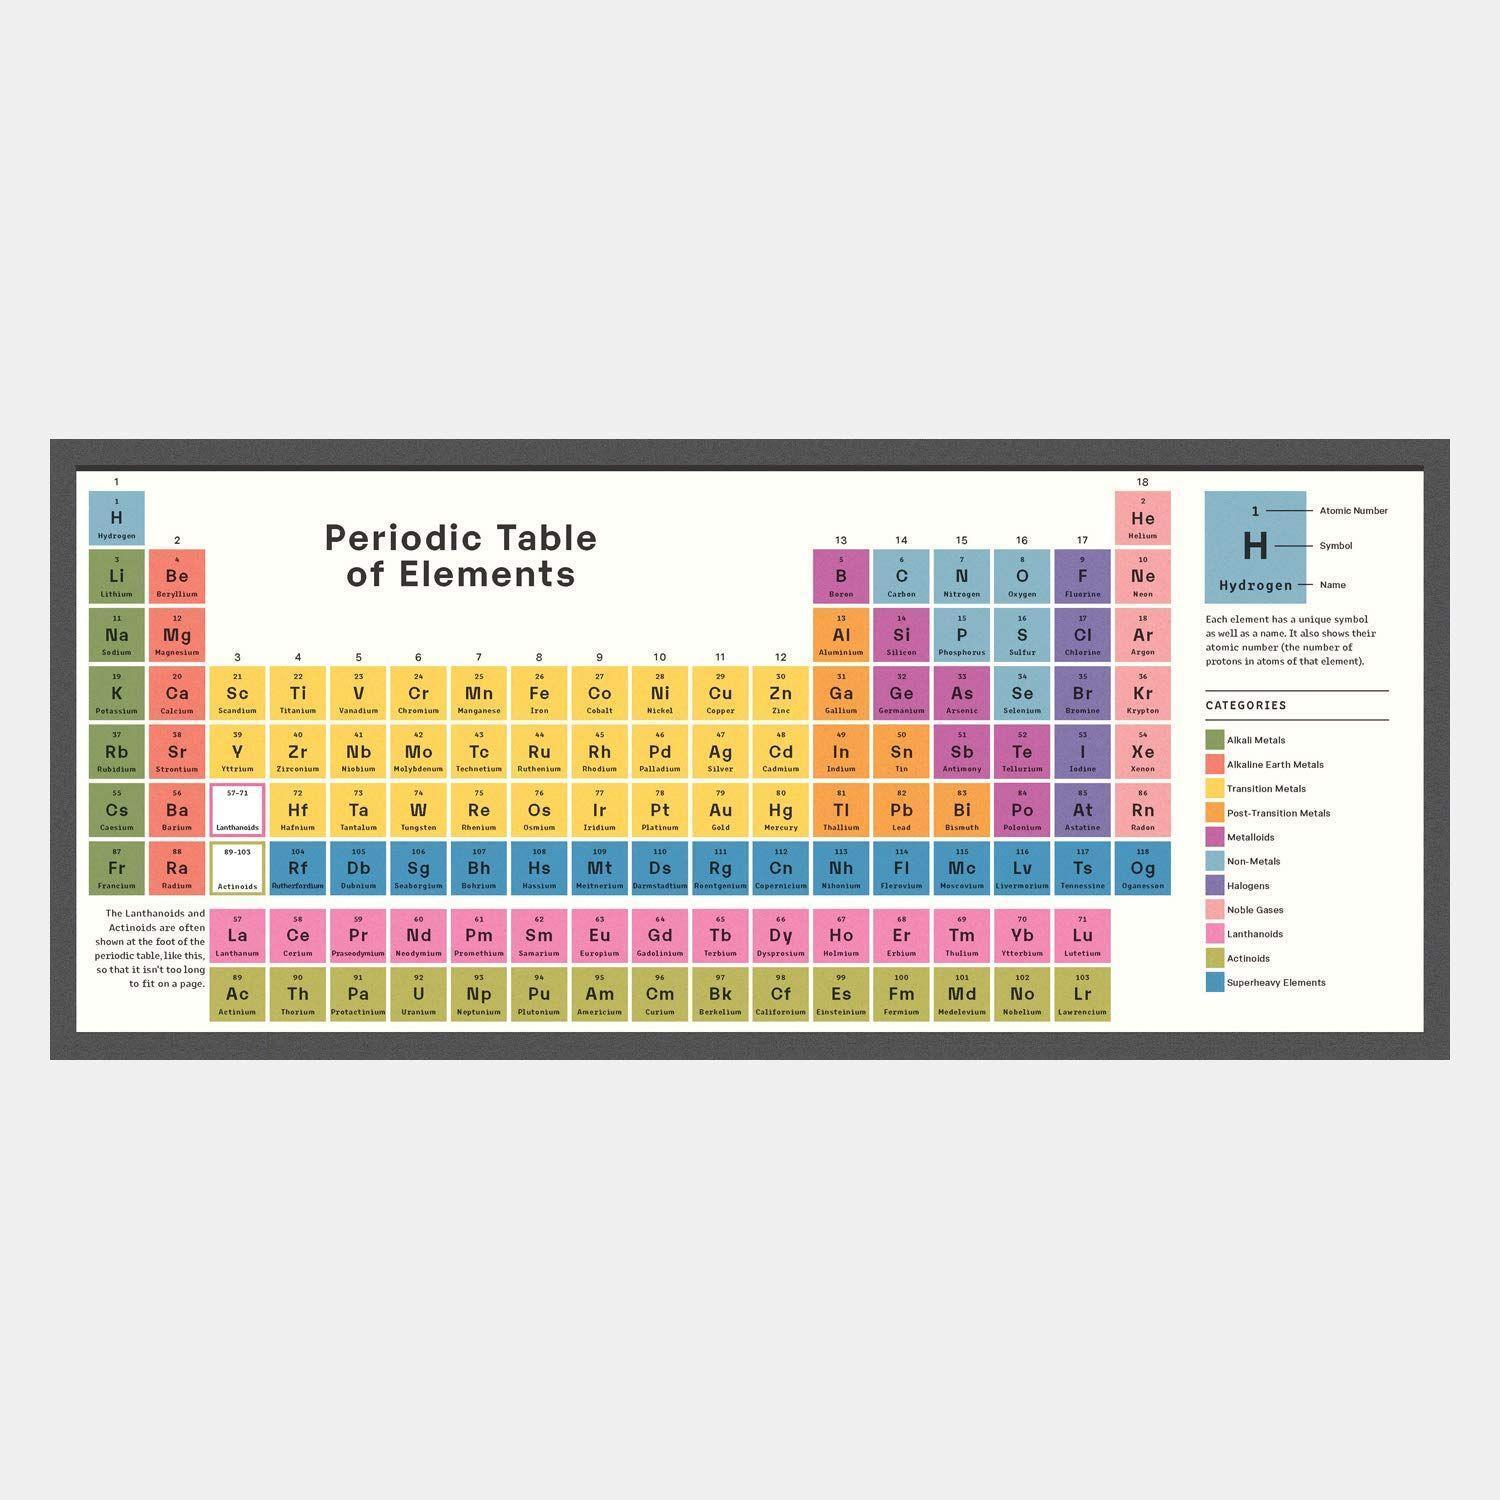 Bild: 9781838661601 | Exploring the Elements | A Complete Guide to the Periodic Table | Buch